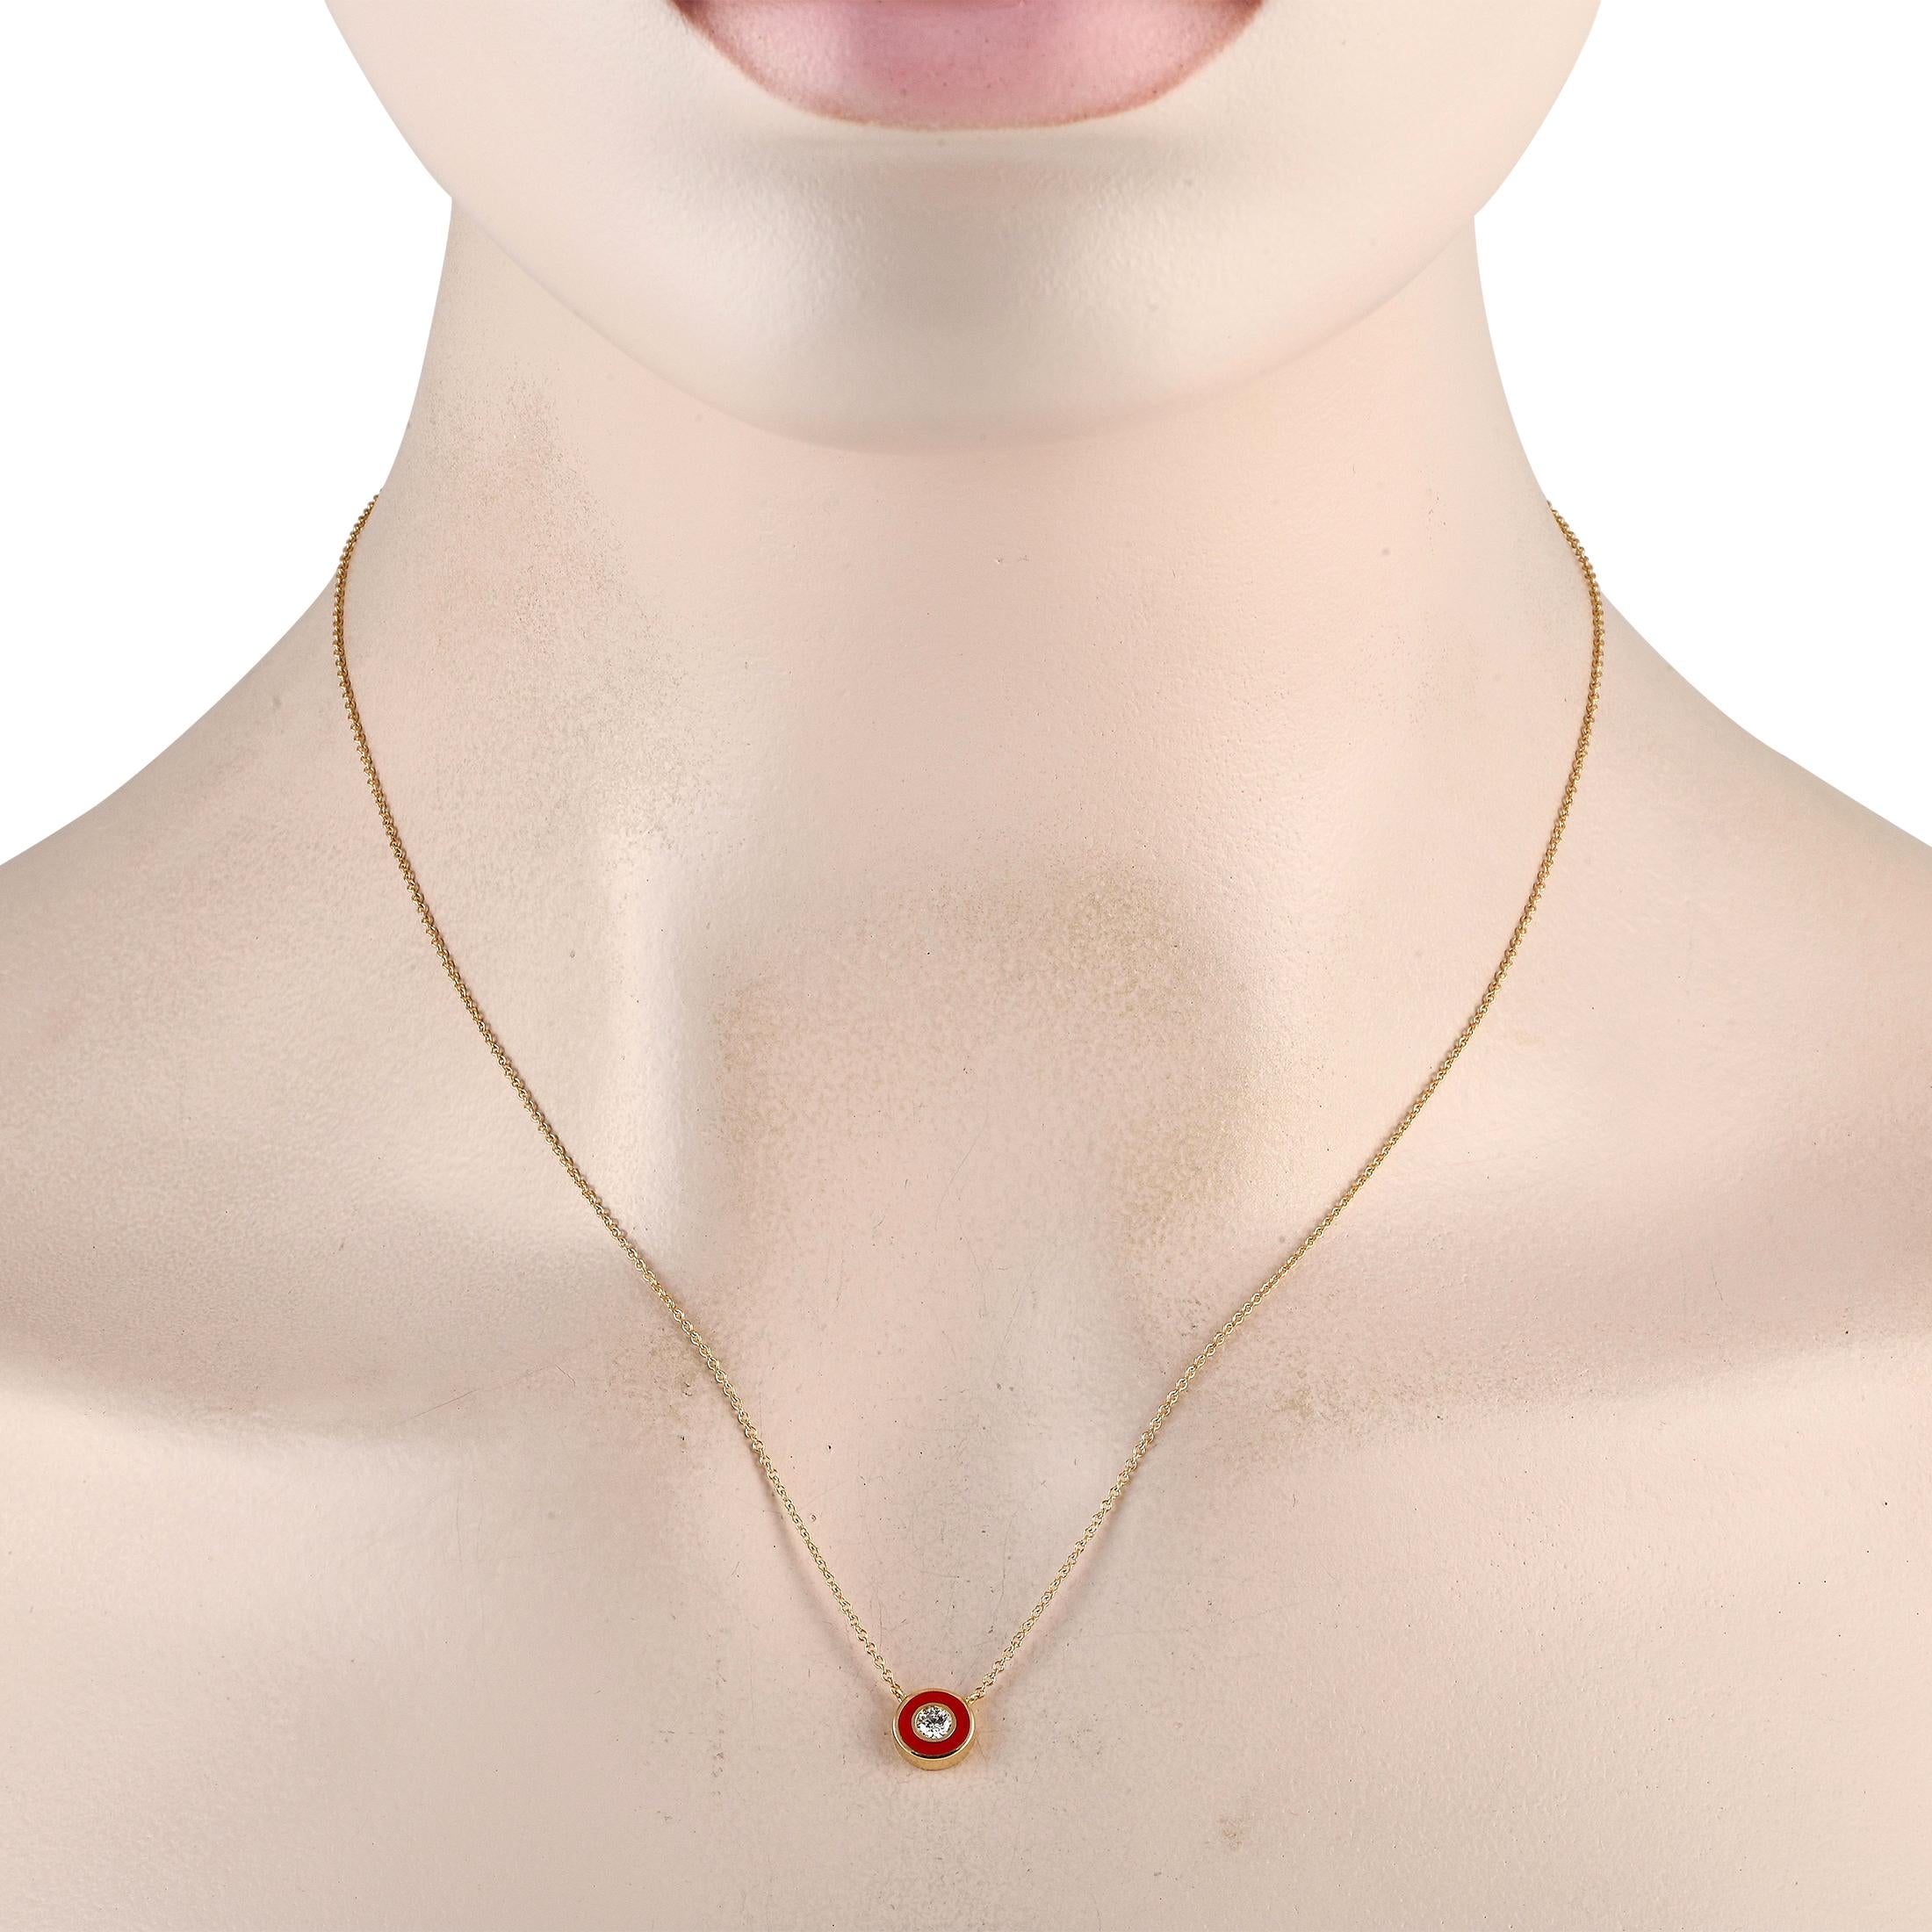 This sleek, simple necklace is an easy way to add a pop of color to any ensemble. At the center of this pieces 18 chain, youll find a circular 14K Yellow Gold pendant measuring 0.35 round. A 0.13 carat bezel-set Diamond surrounded by an inset red